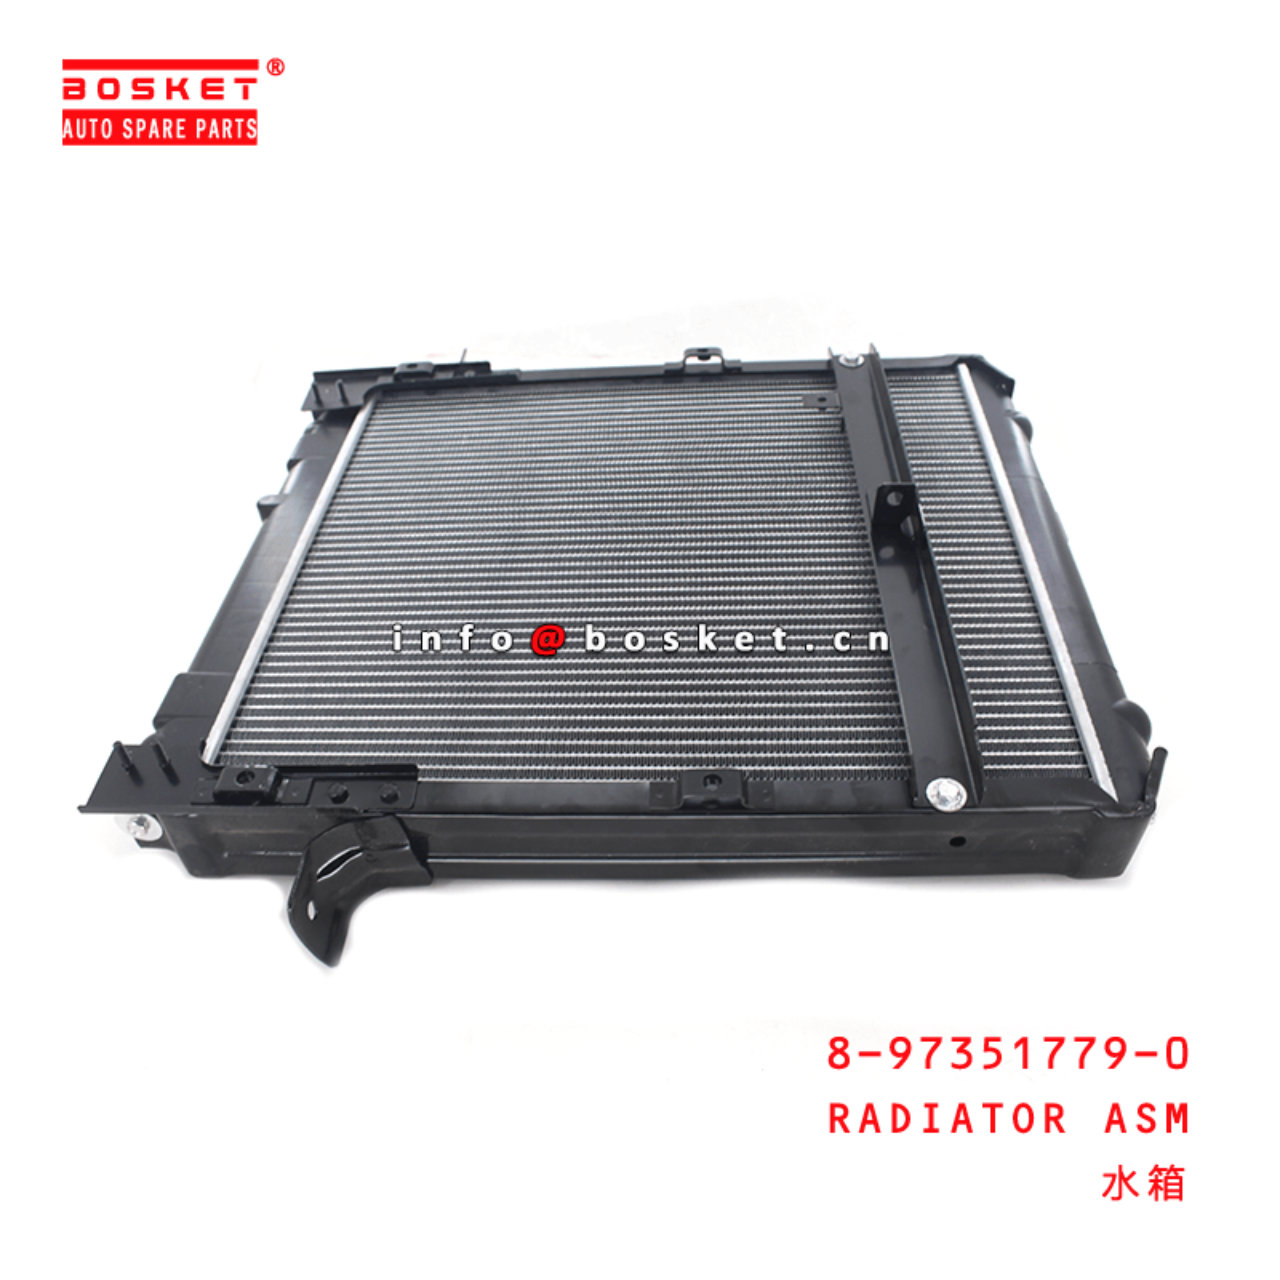  8-97351779-0 Radiator Assembly 8973517790 Suitable for ISUZU NKR77 4JH1